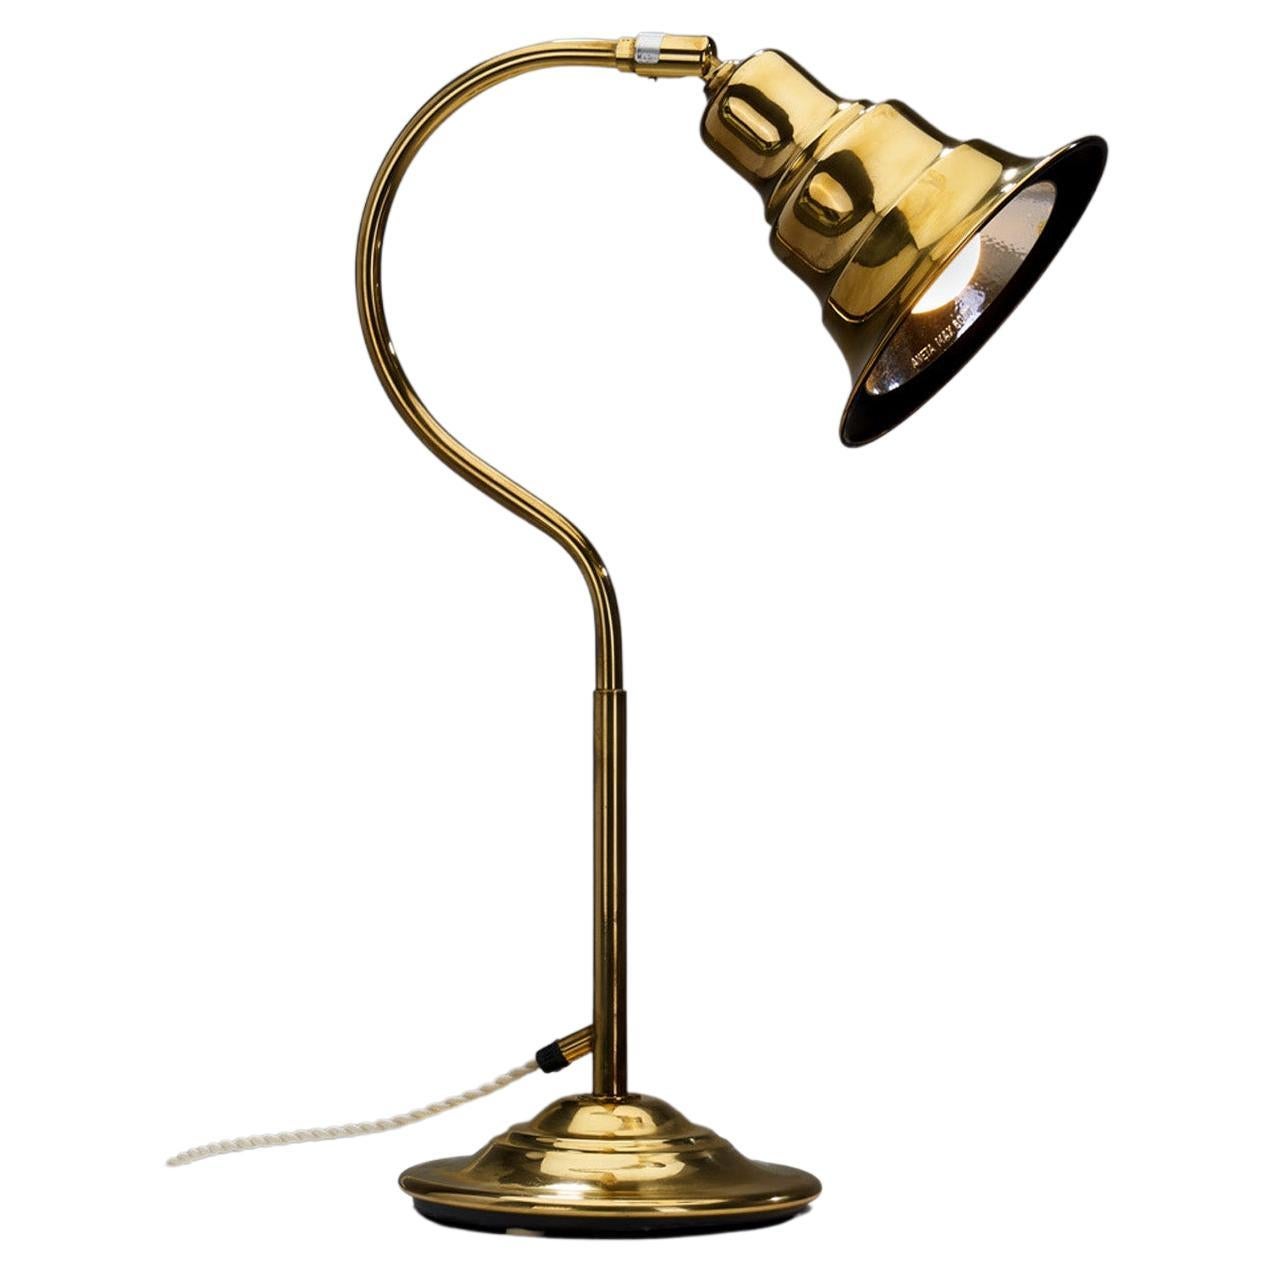 Jan Wickelgren Curved Brass Table Lamp for Aneta Belysning AB, Sweden, 1970s For Sale